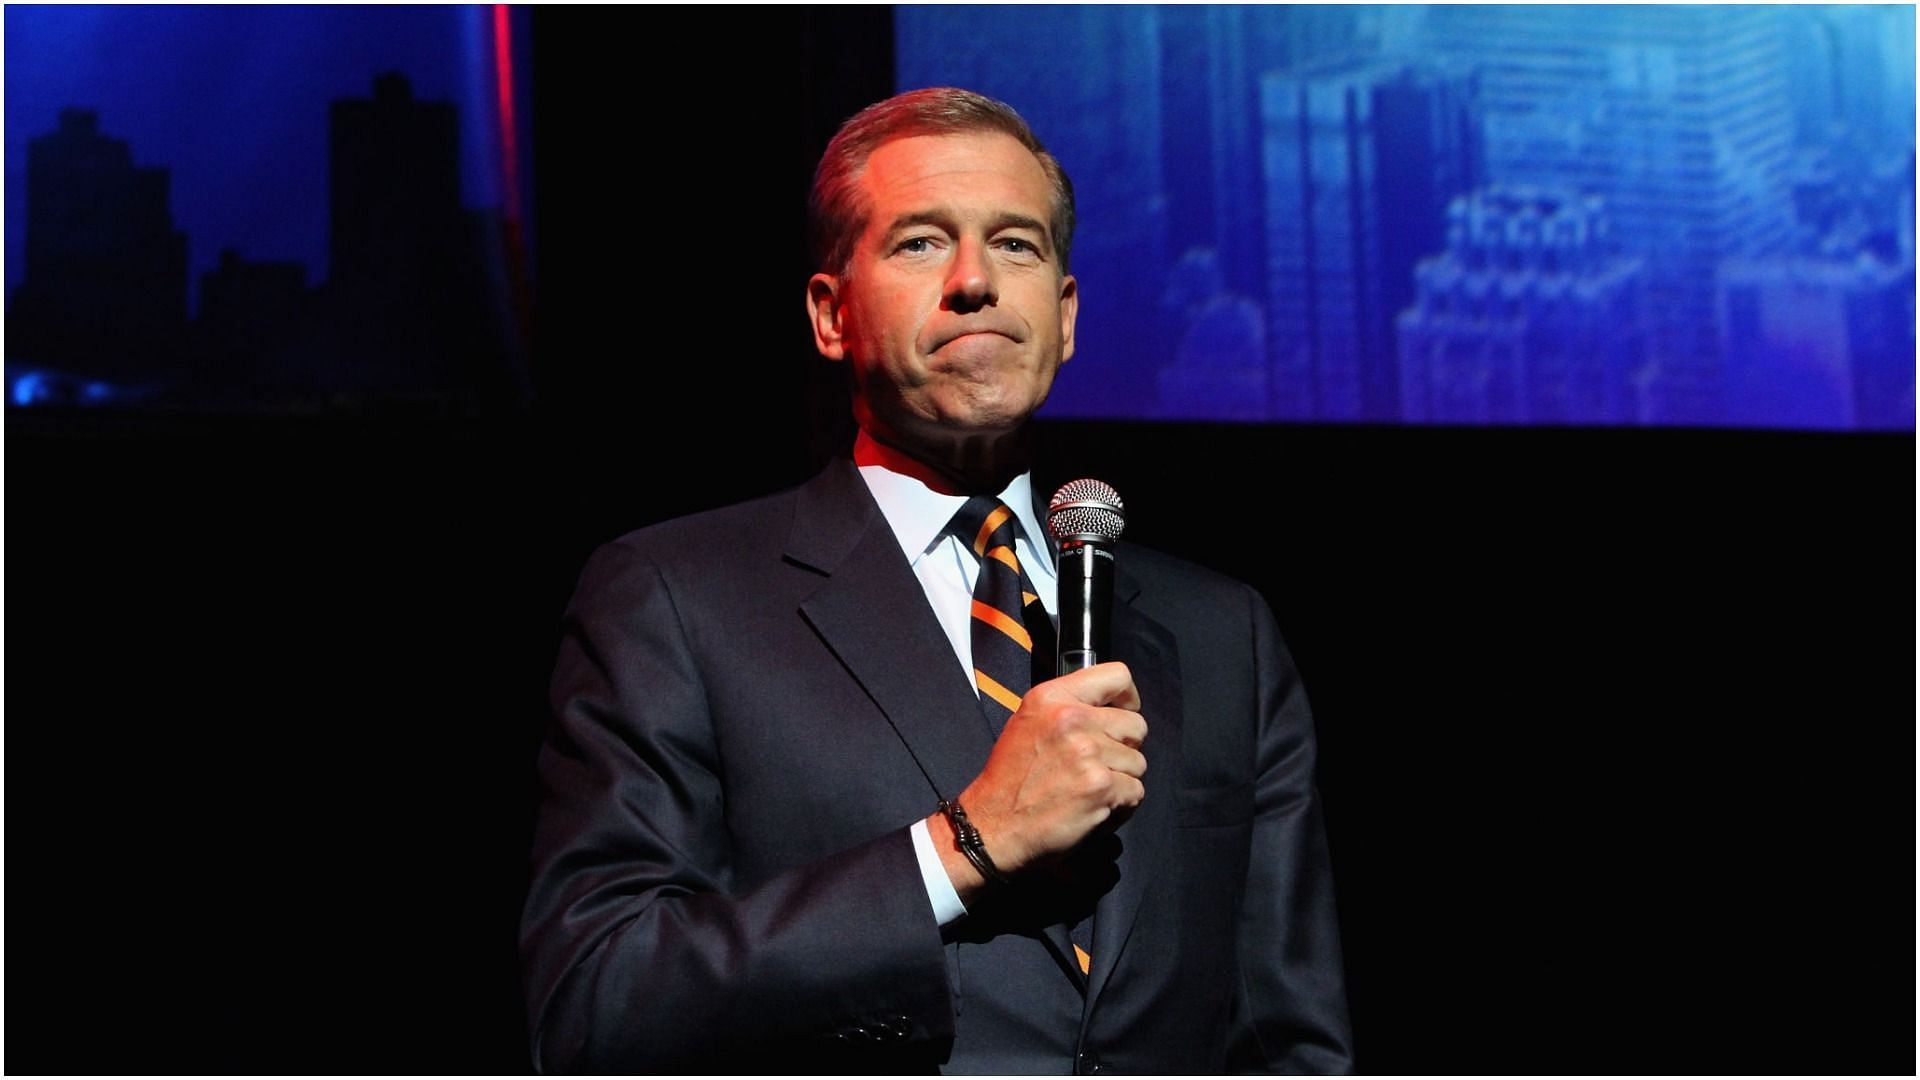 NBC News Anchor Brian Williams speaks onstage at The New York Comedy Festival and The Bob Woodruff Foundation present the 8th Annual Stand Up For Heroes Event at The Theater at Madison Square Garden on November 5, 2014, in New York City (Image via Getty Images)